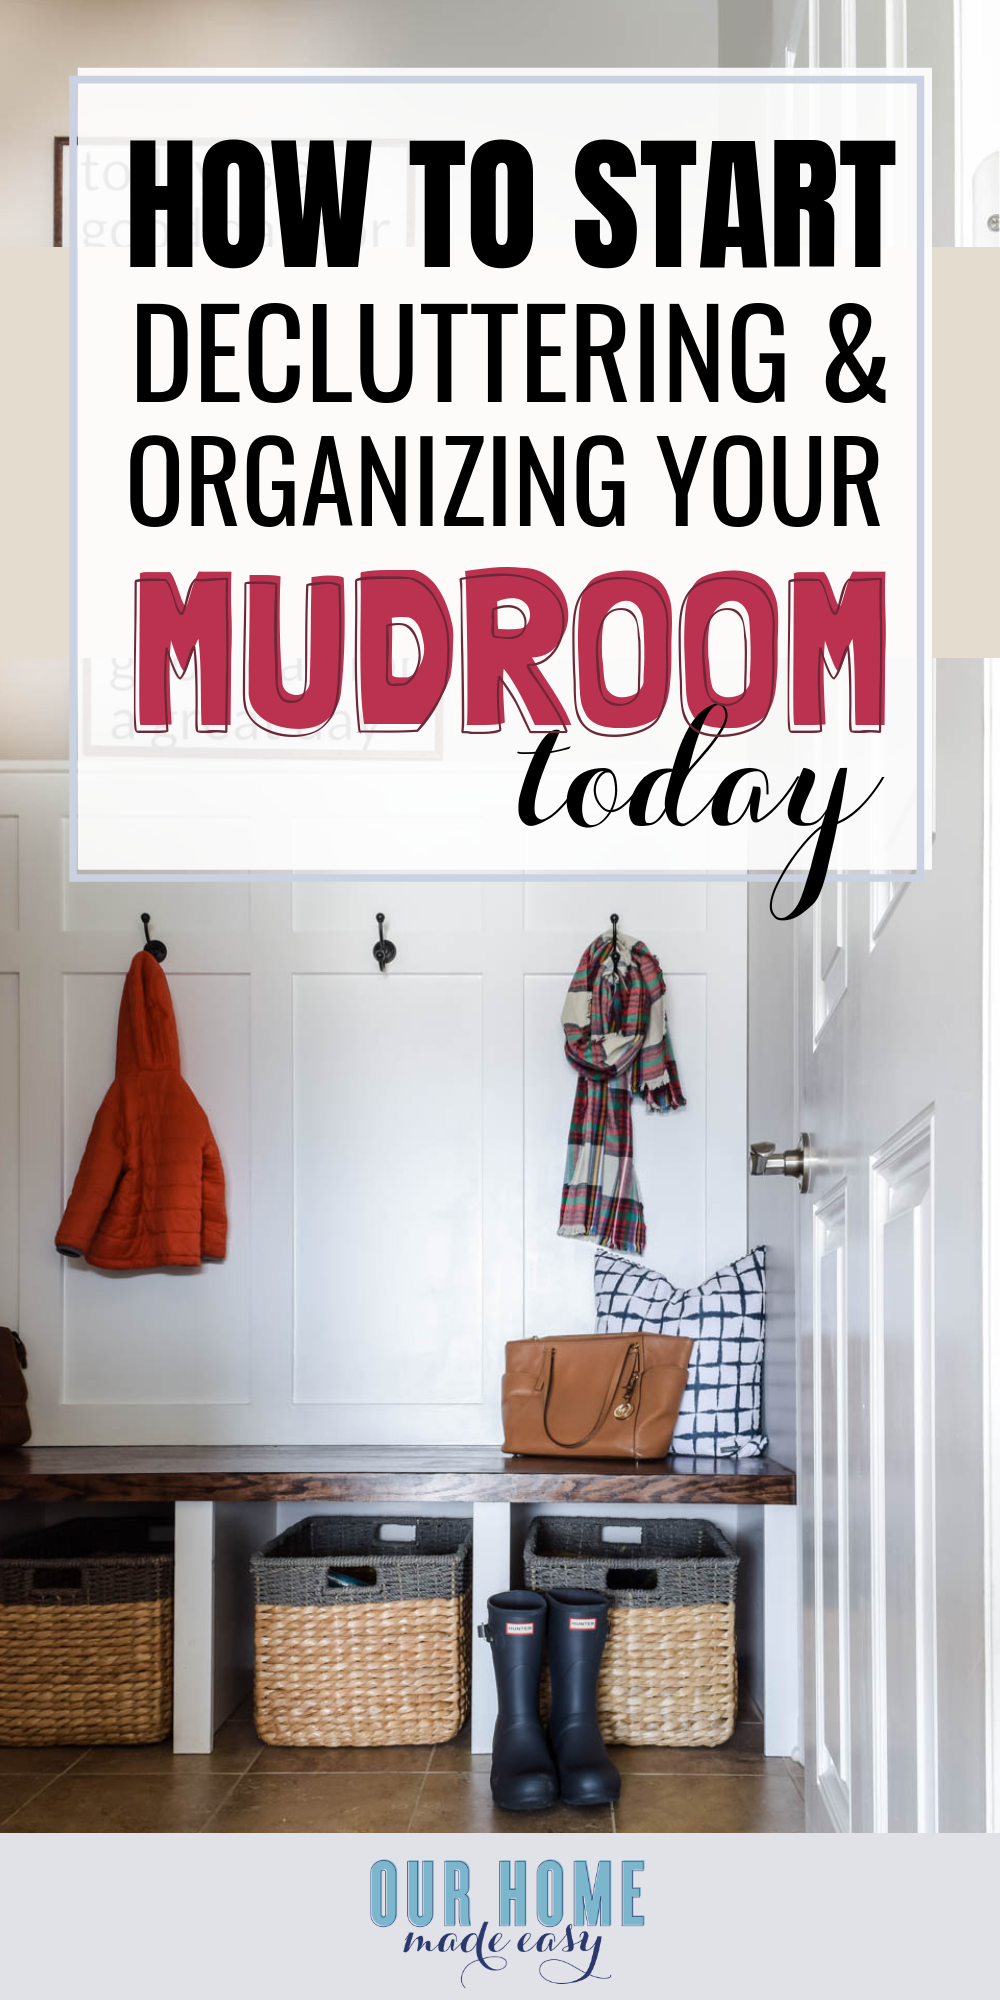 This is the DIY mudroom organization guide for small spaces. These storage ideas will help keep you organized, no matter the size of your mudroom! #homedecor #organization #ourhomemadeeasy